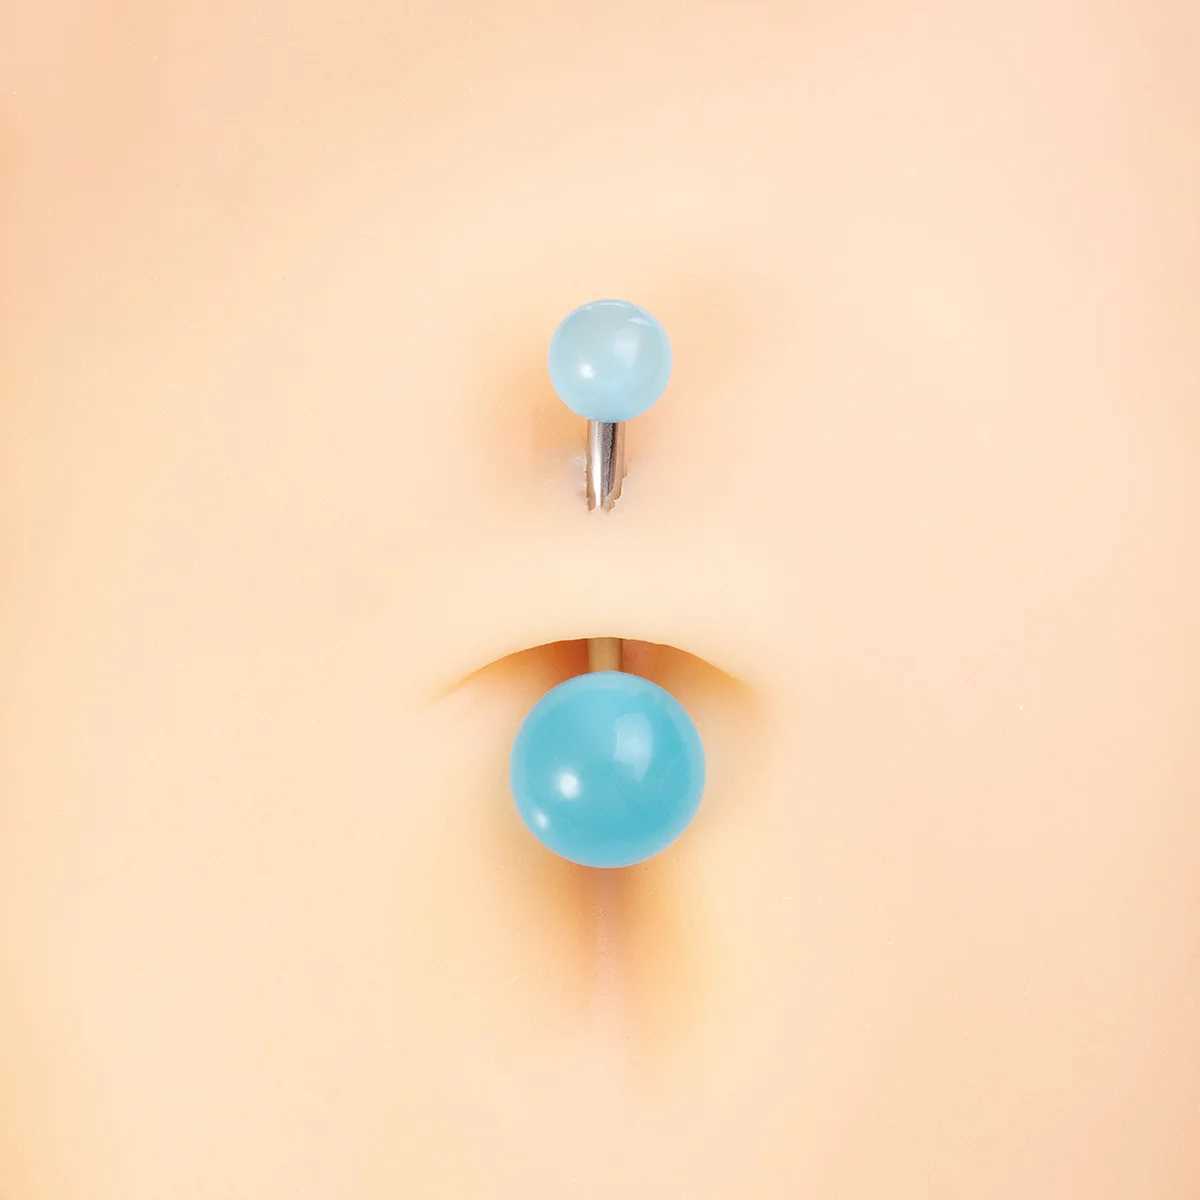 0TSG Navel Rings Glow in The Dark Belly Rings Surgical Steel Belly Button Rings for Women Girls Navel Bars Body Piercing Jewelry 14 Gauge d240509